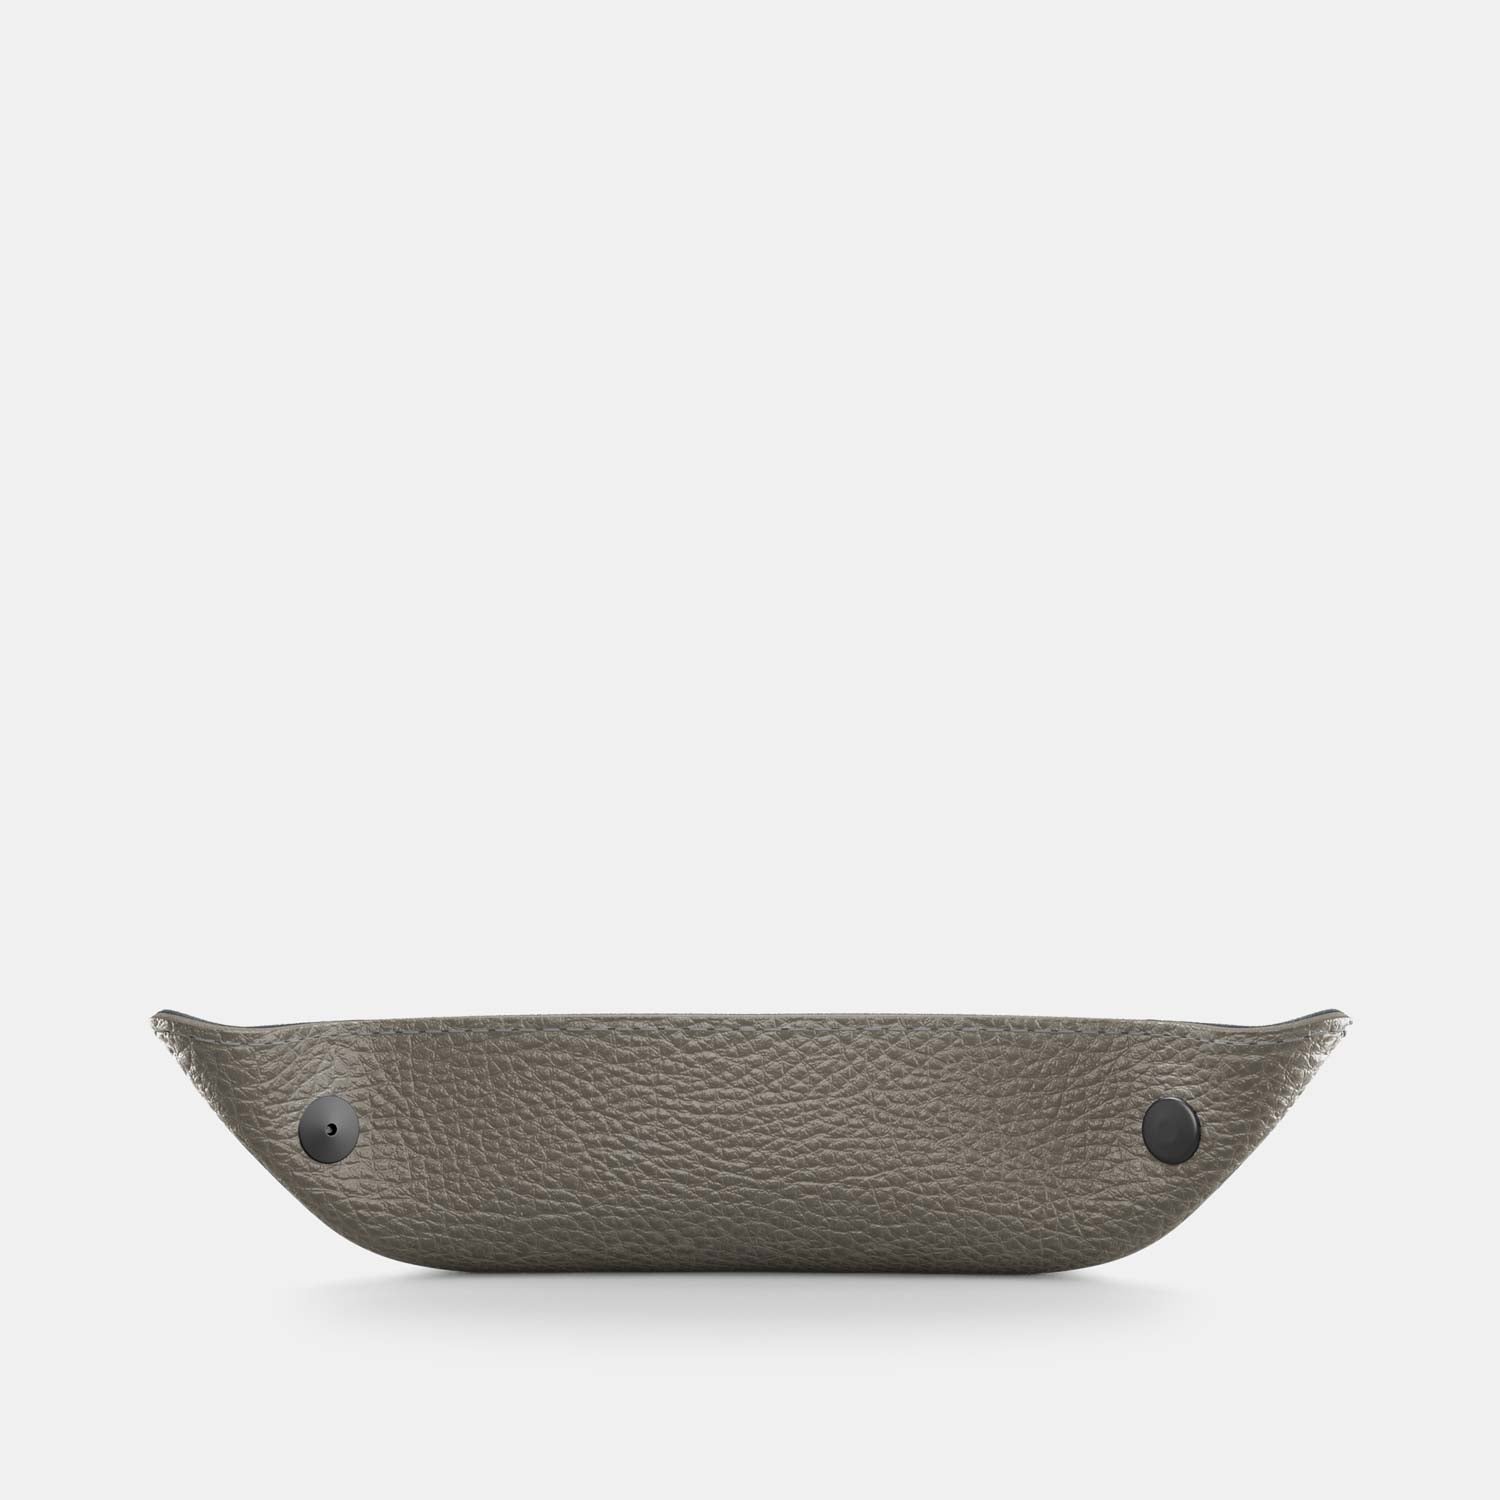 Leather Catch-all Tray - Grey and Grey - RYAN London